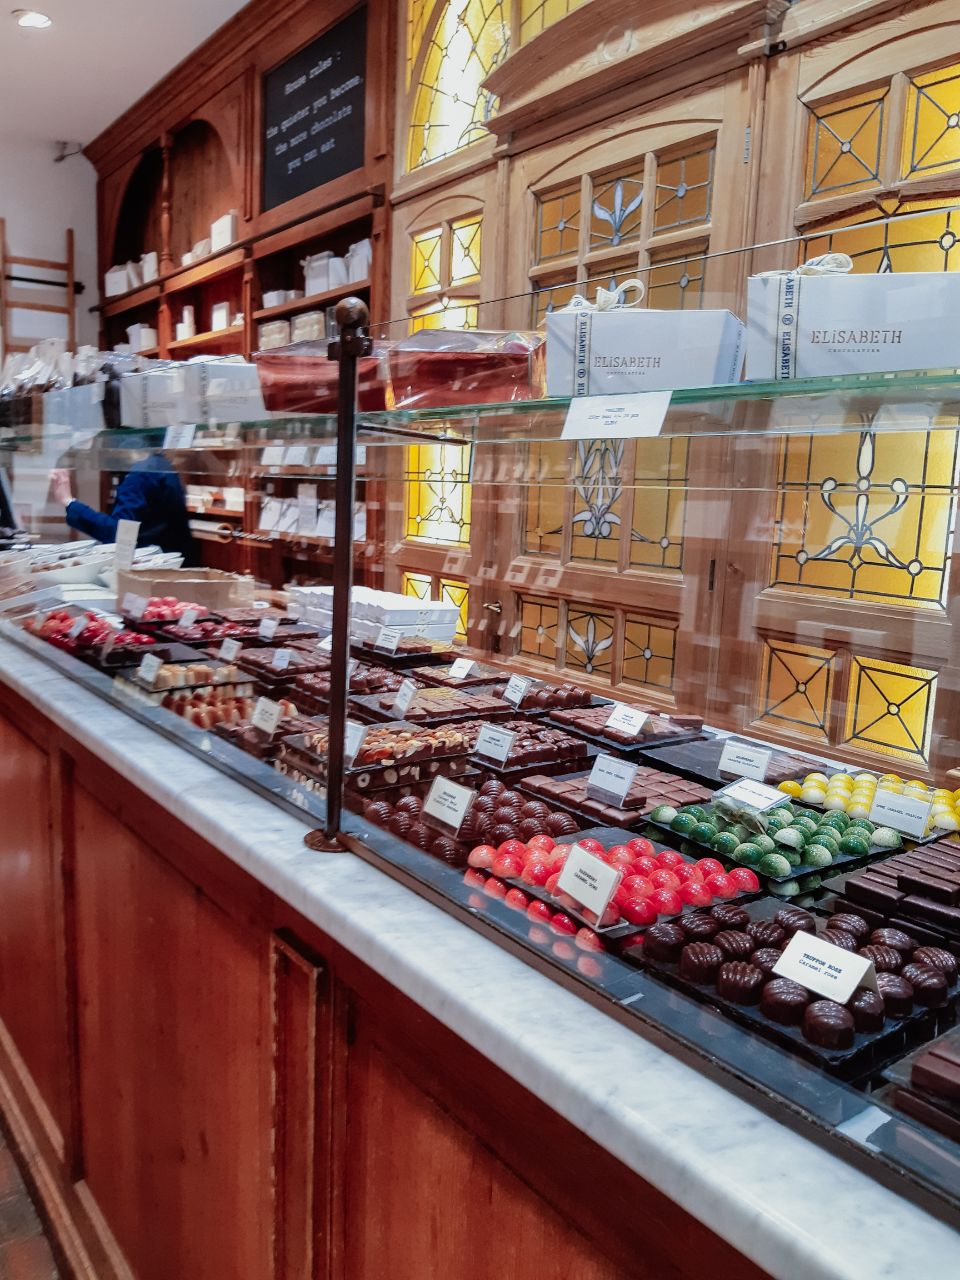 Chocolate Store in Brussels
Perfect 2 day Brussels itinerary